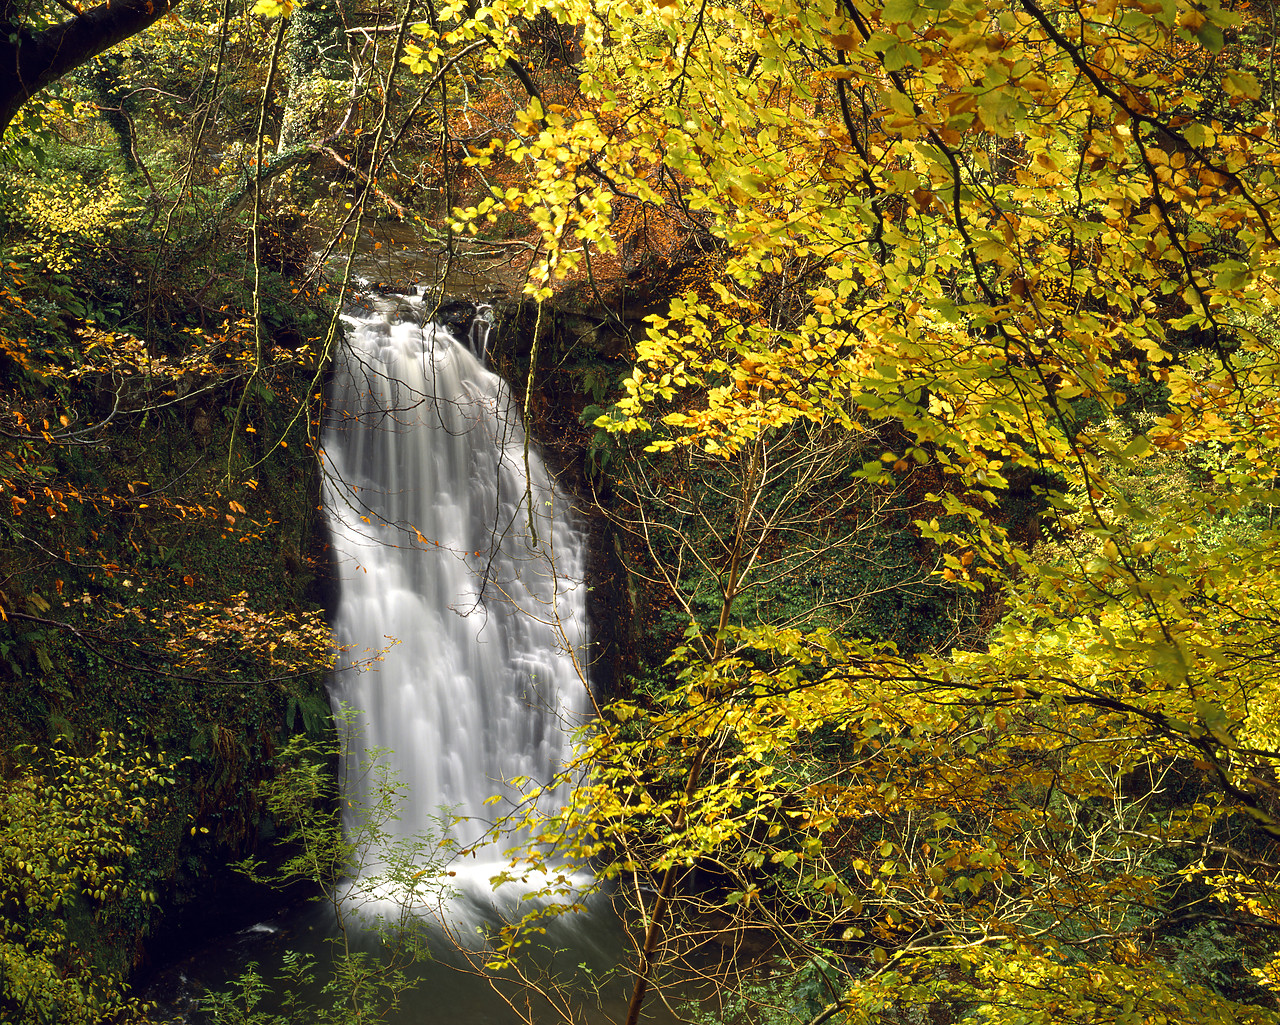 #924120-2 - Falling Foss In Autumn, Yprkshire Moors, England